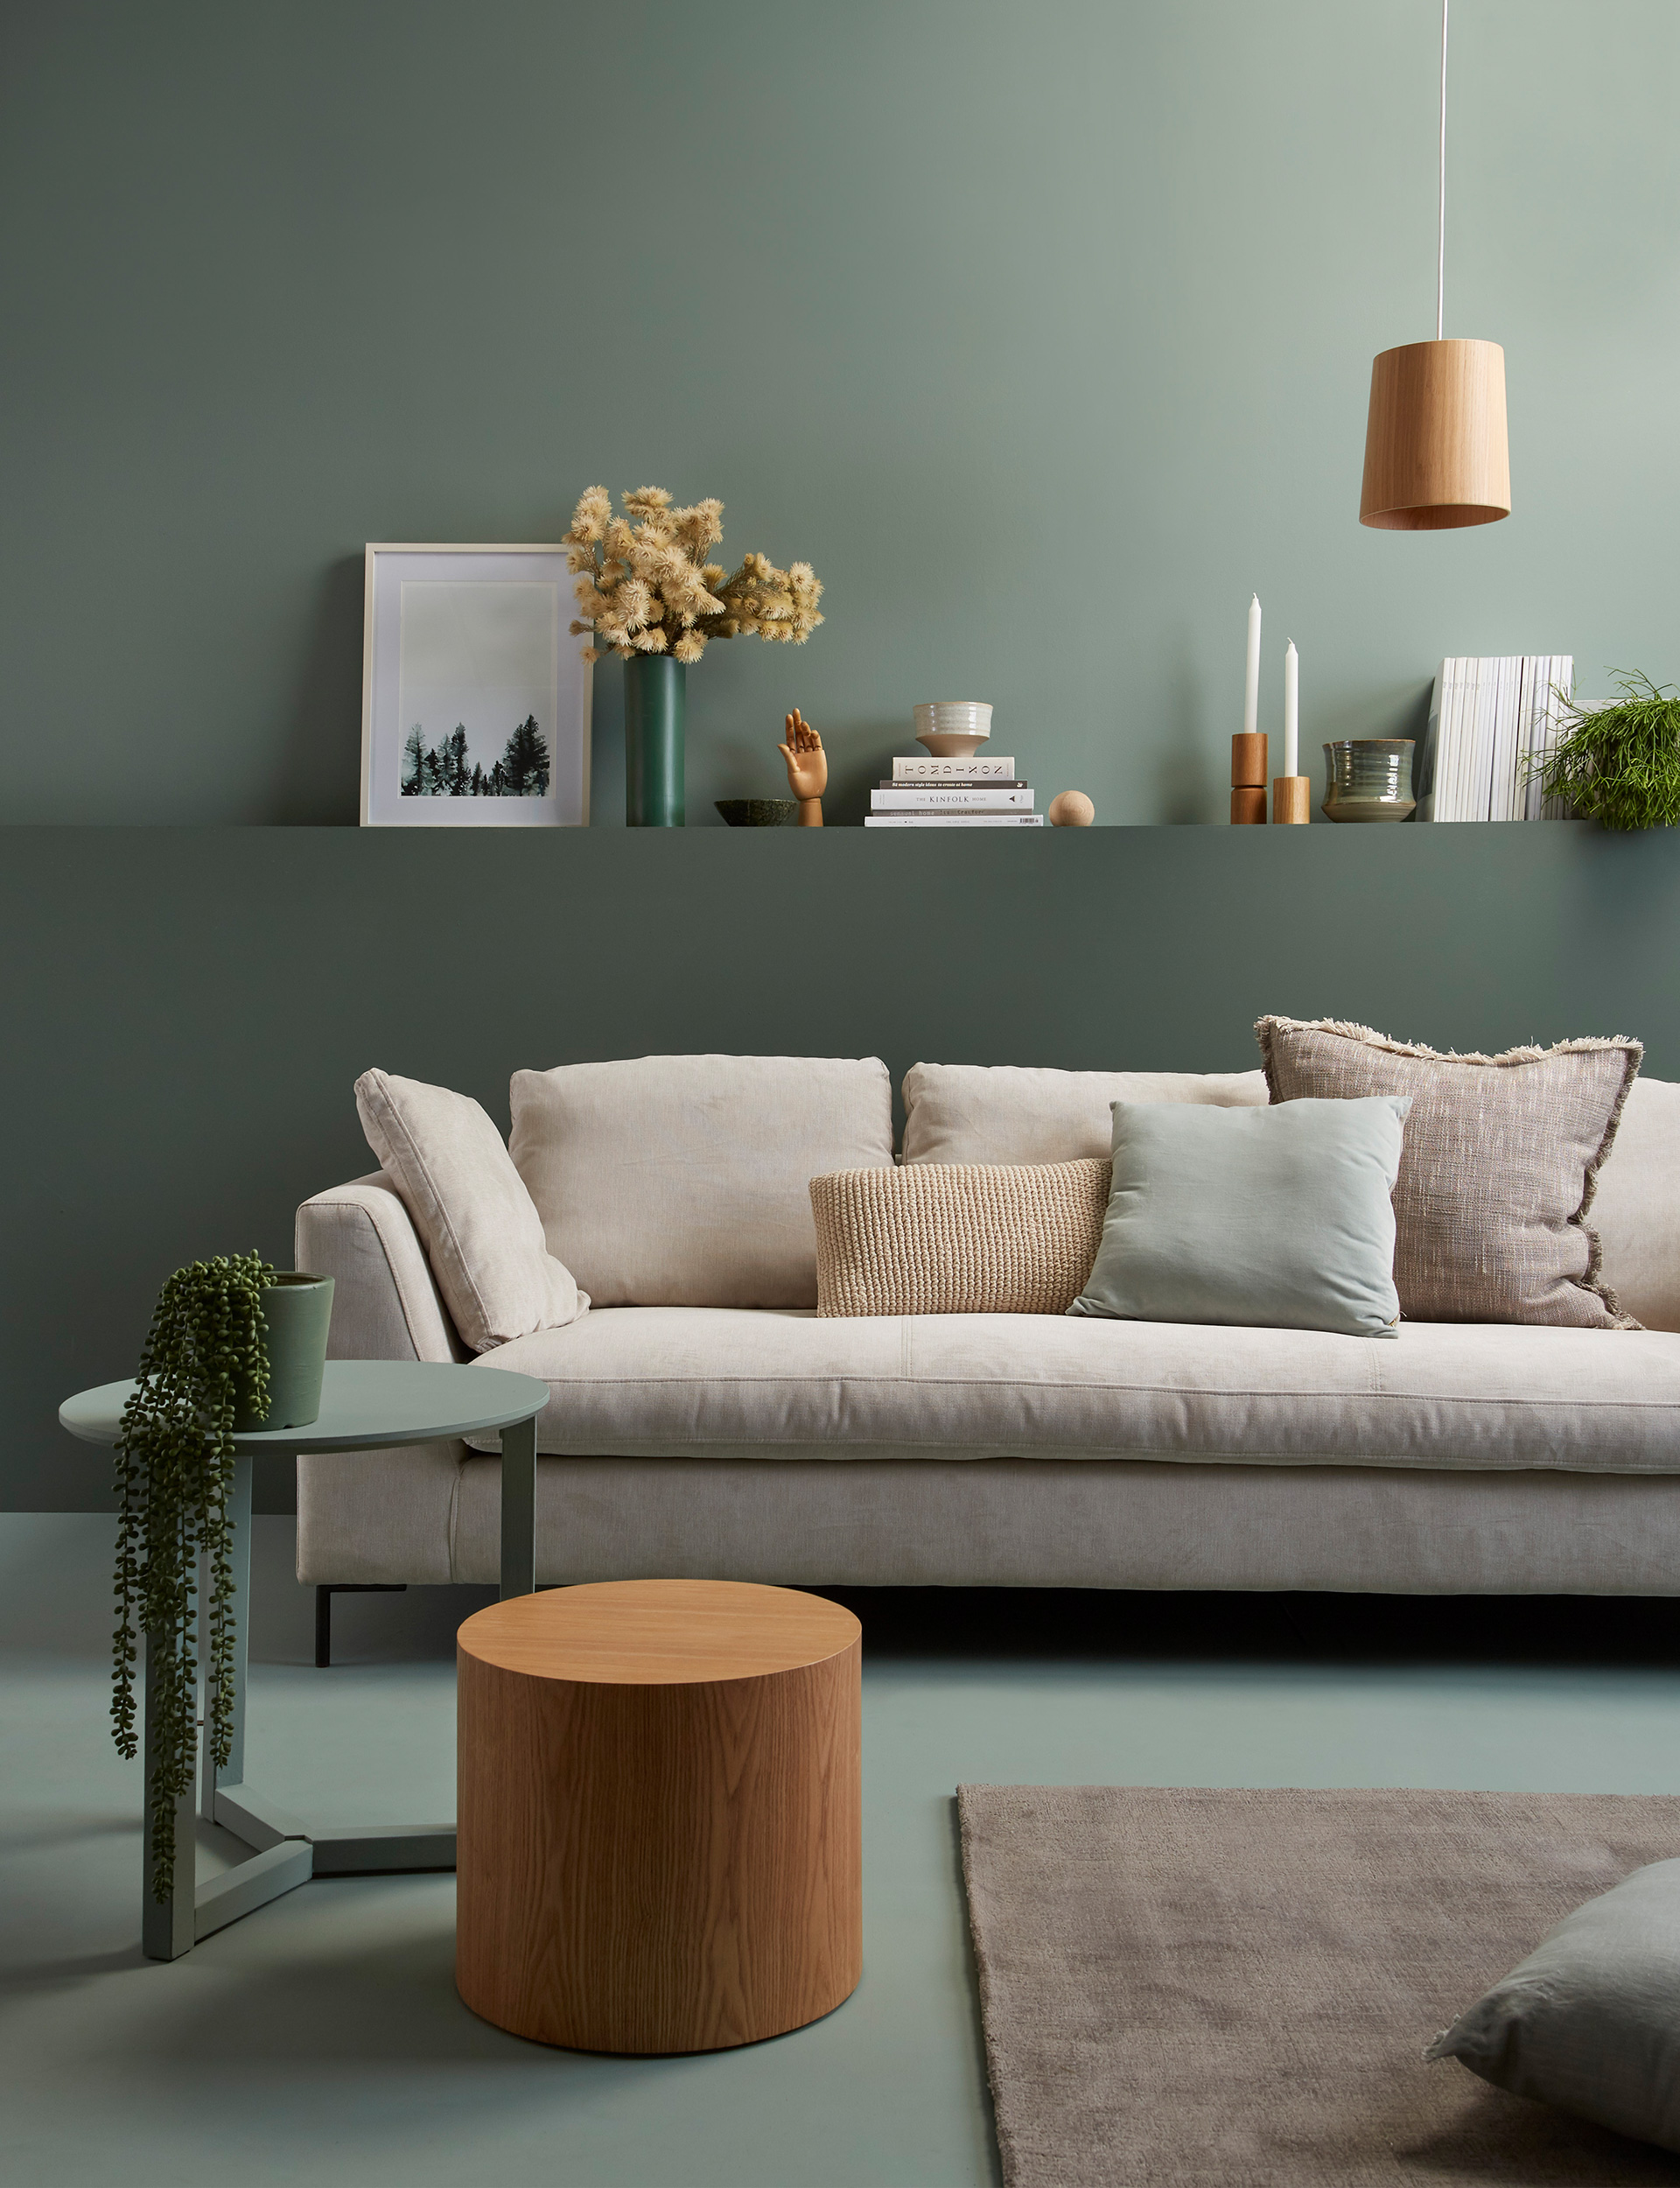 How to paint your floors, sage green living room